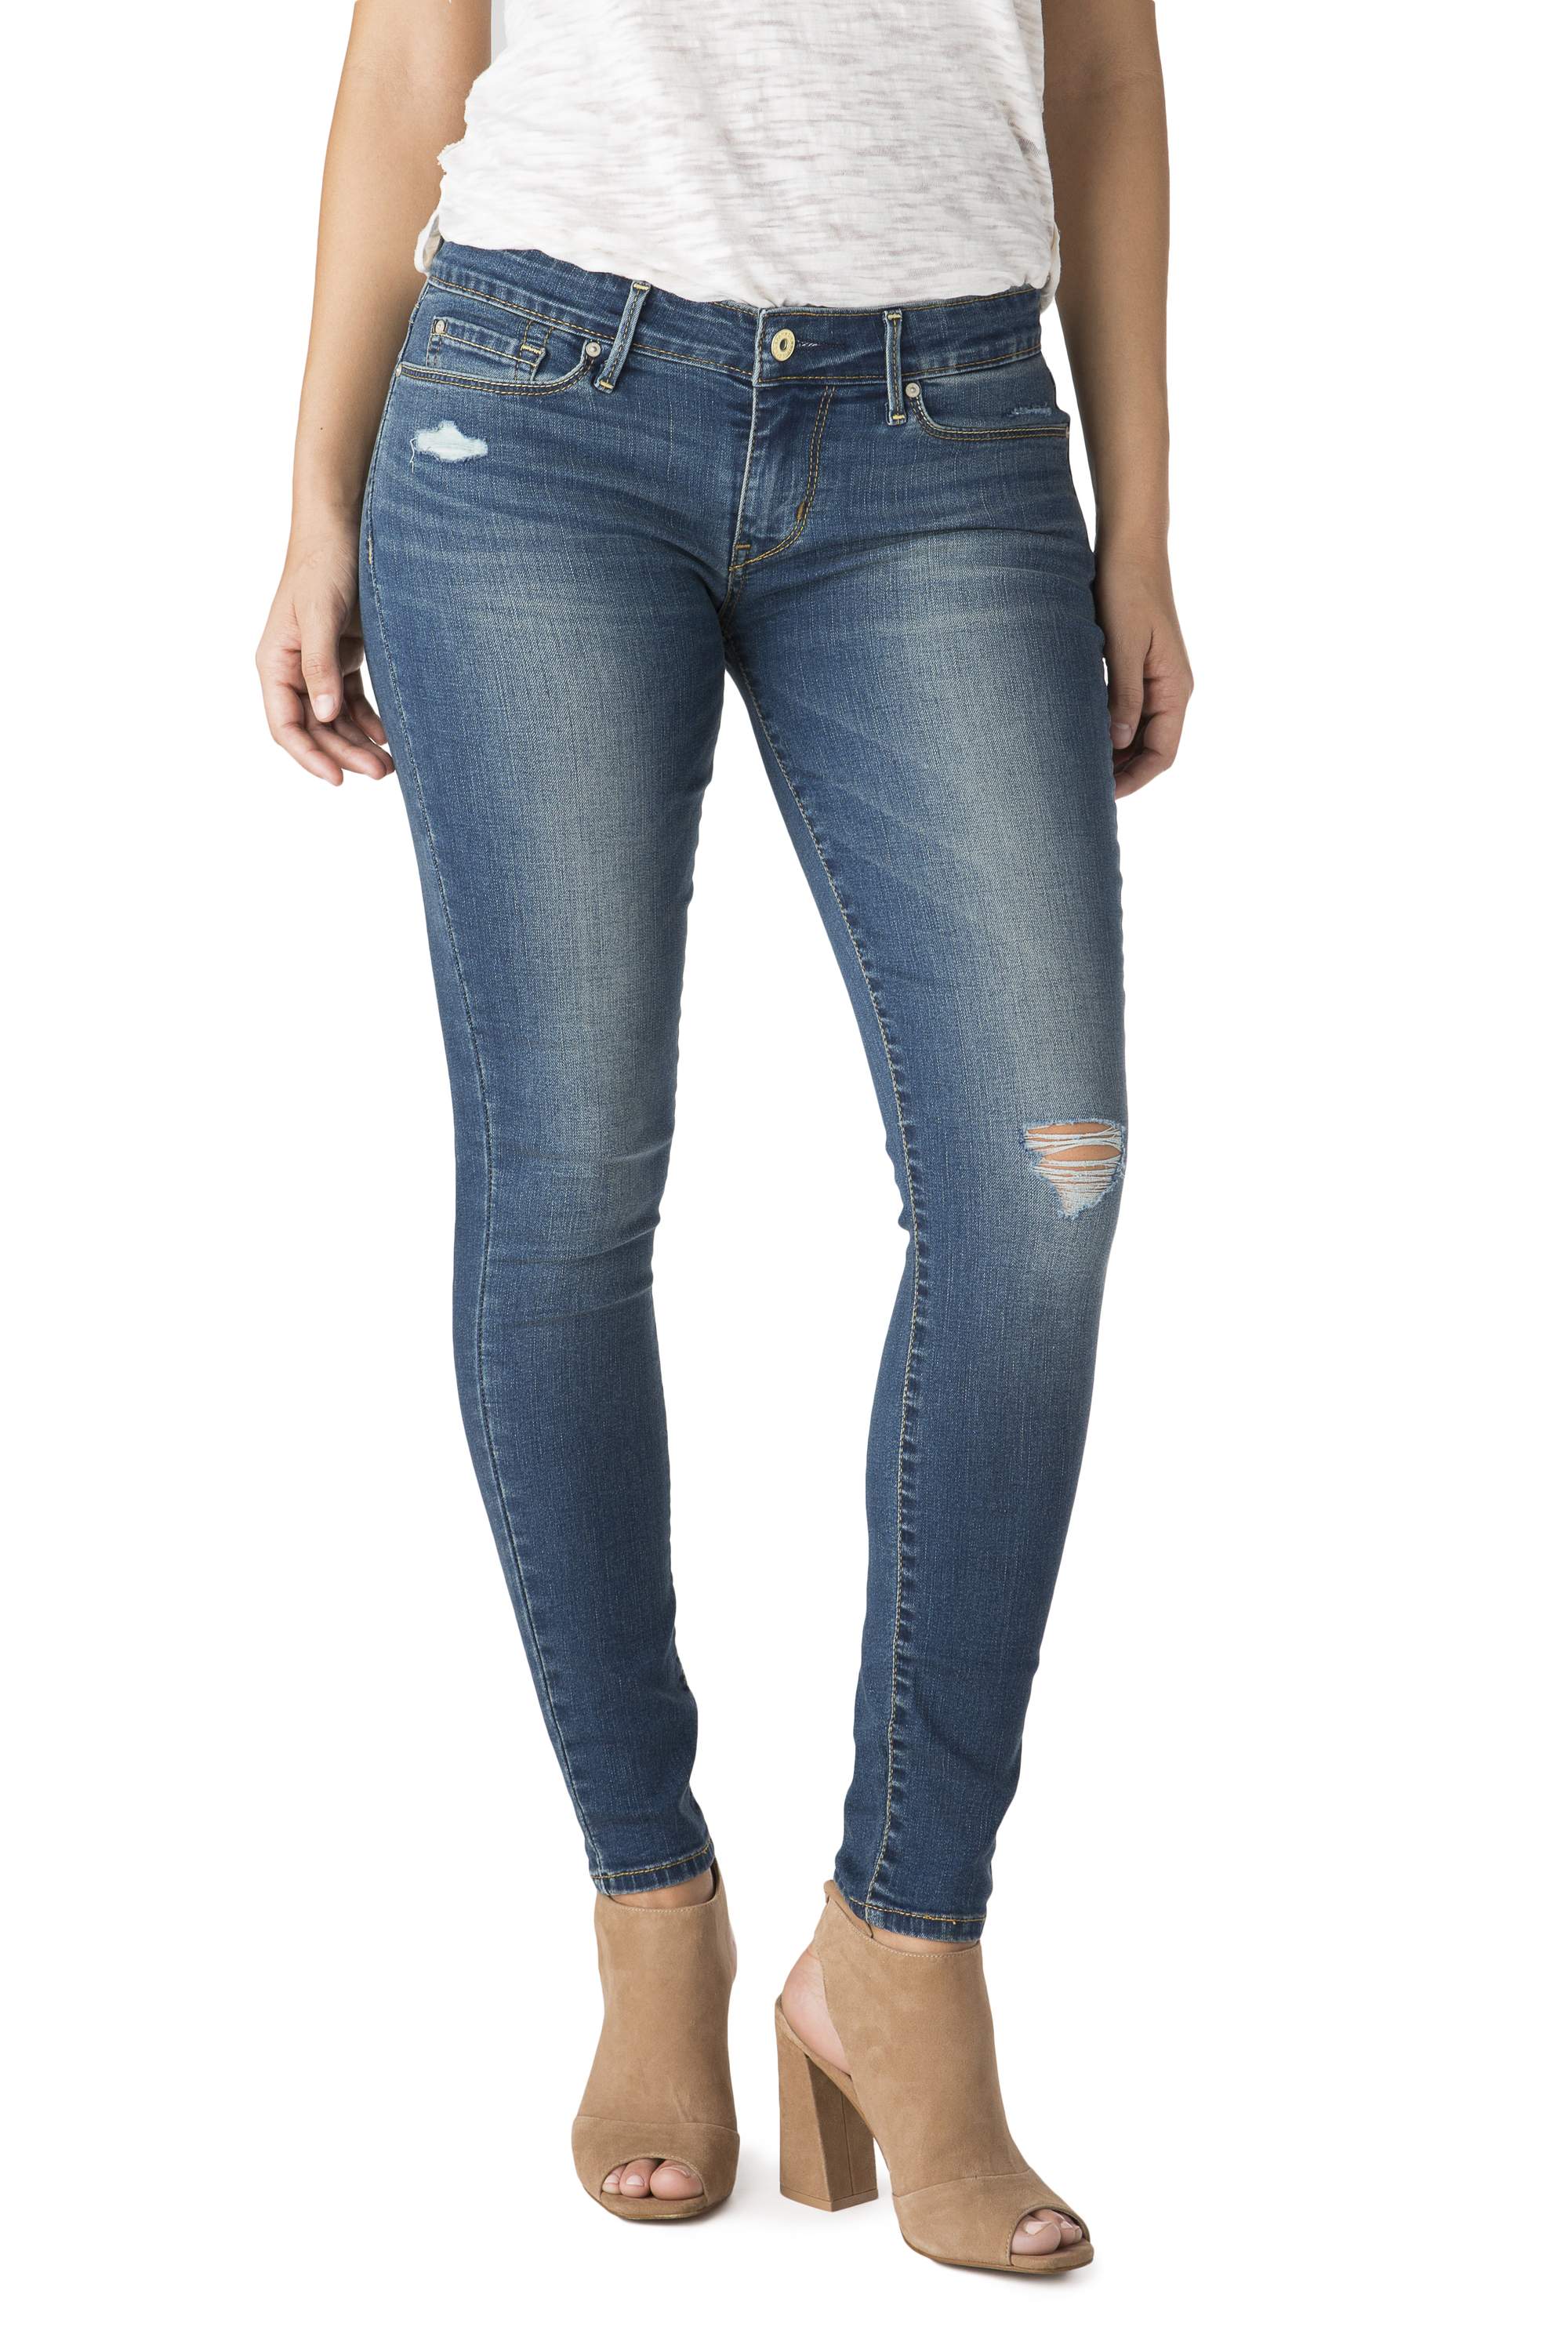 Signature by Levi Strauss & Co. Women's Low Rise Jeggings - image 1 of 7